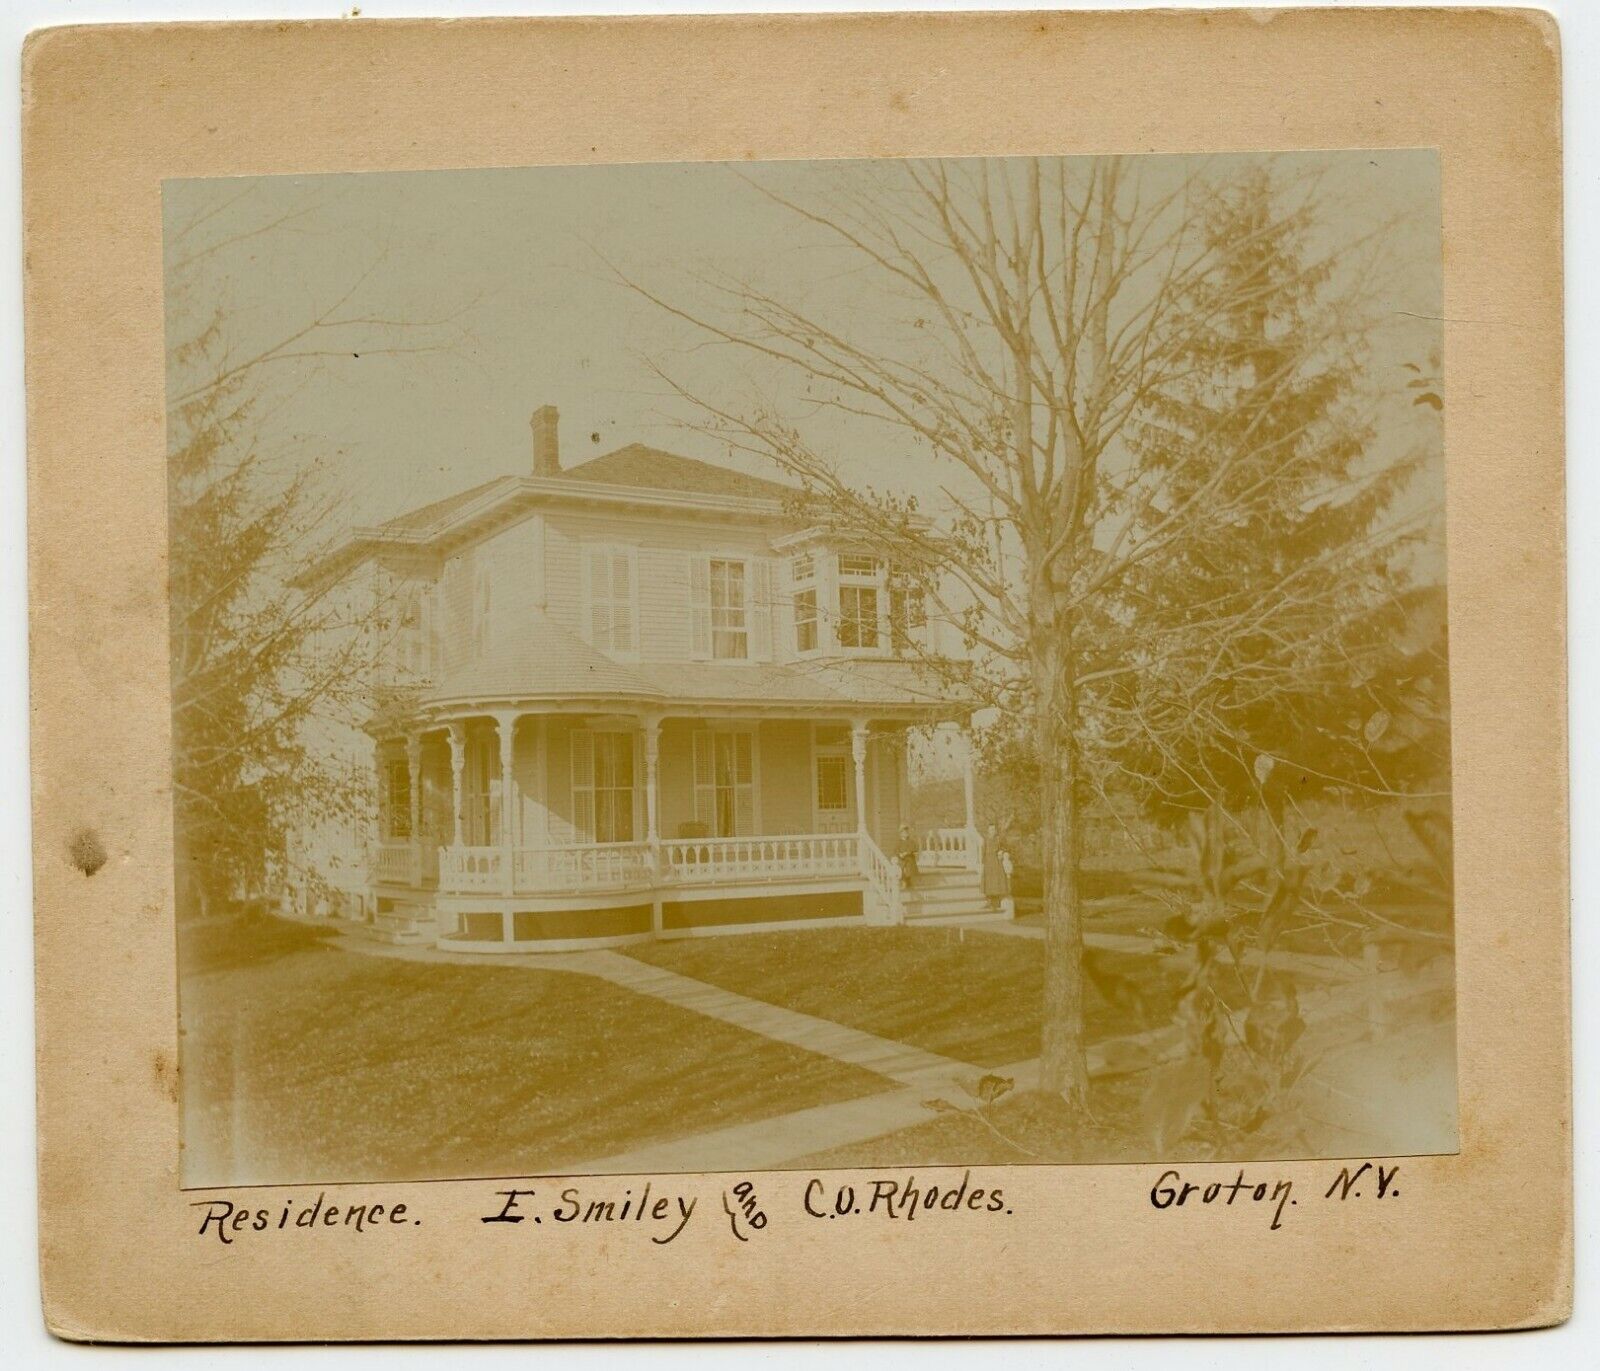 Smiley and Rhodes Residence, Groton N.Y.  Vintage Photo